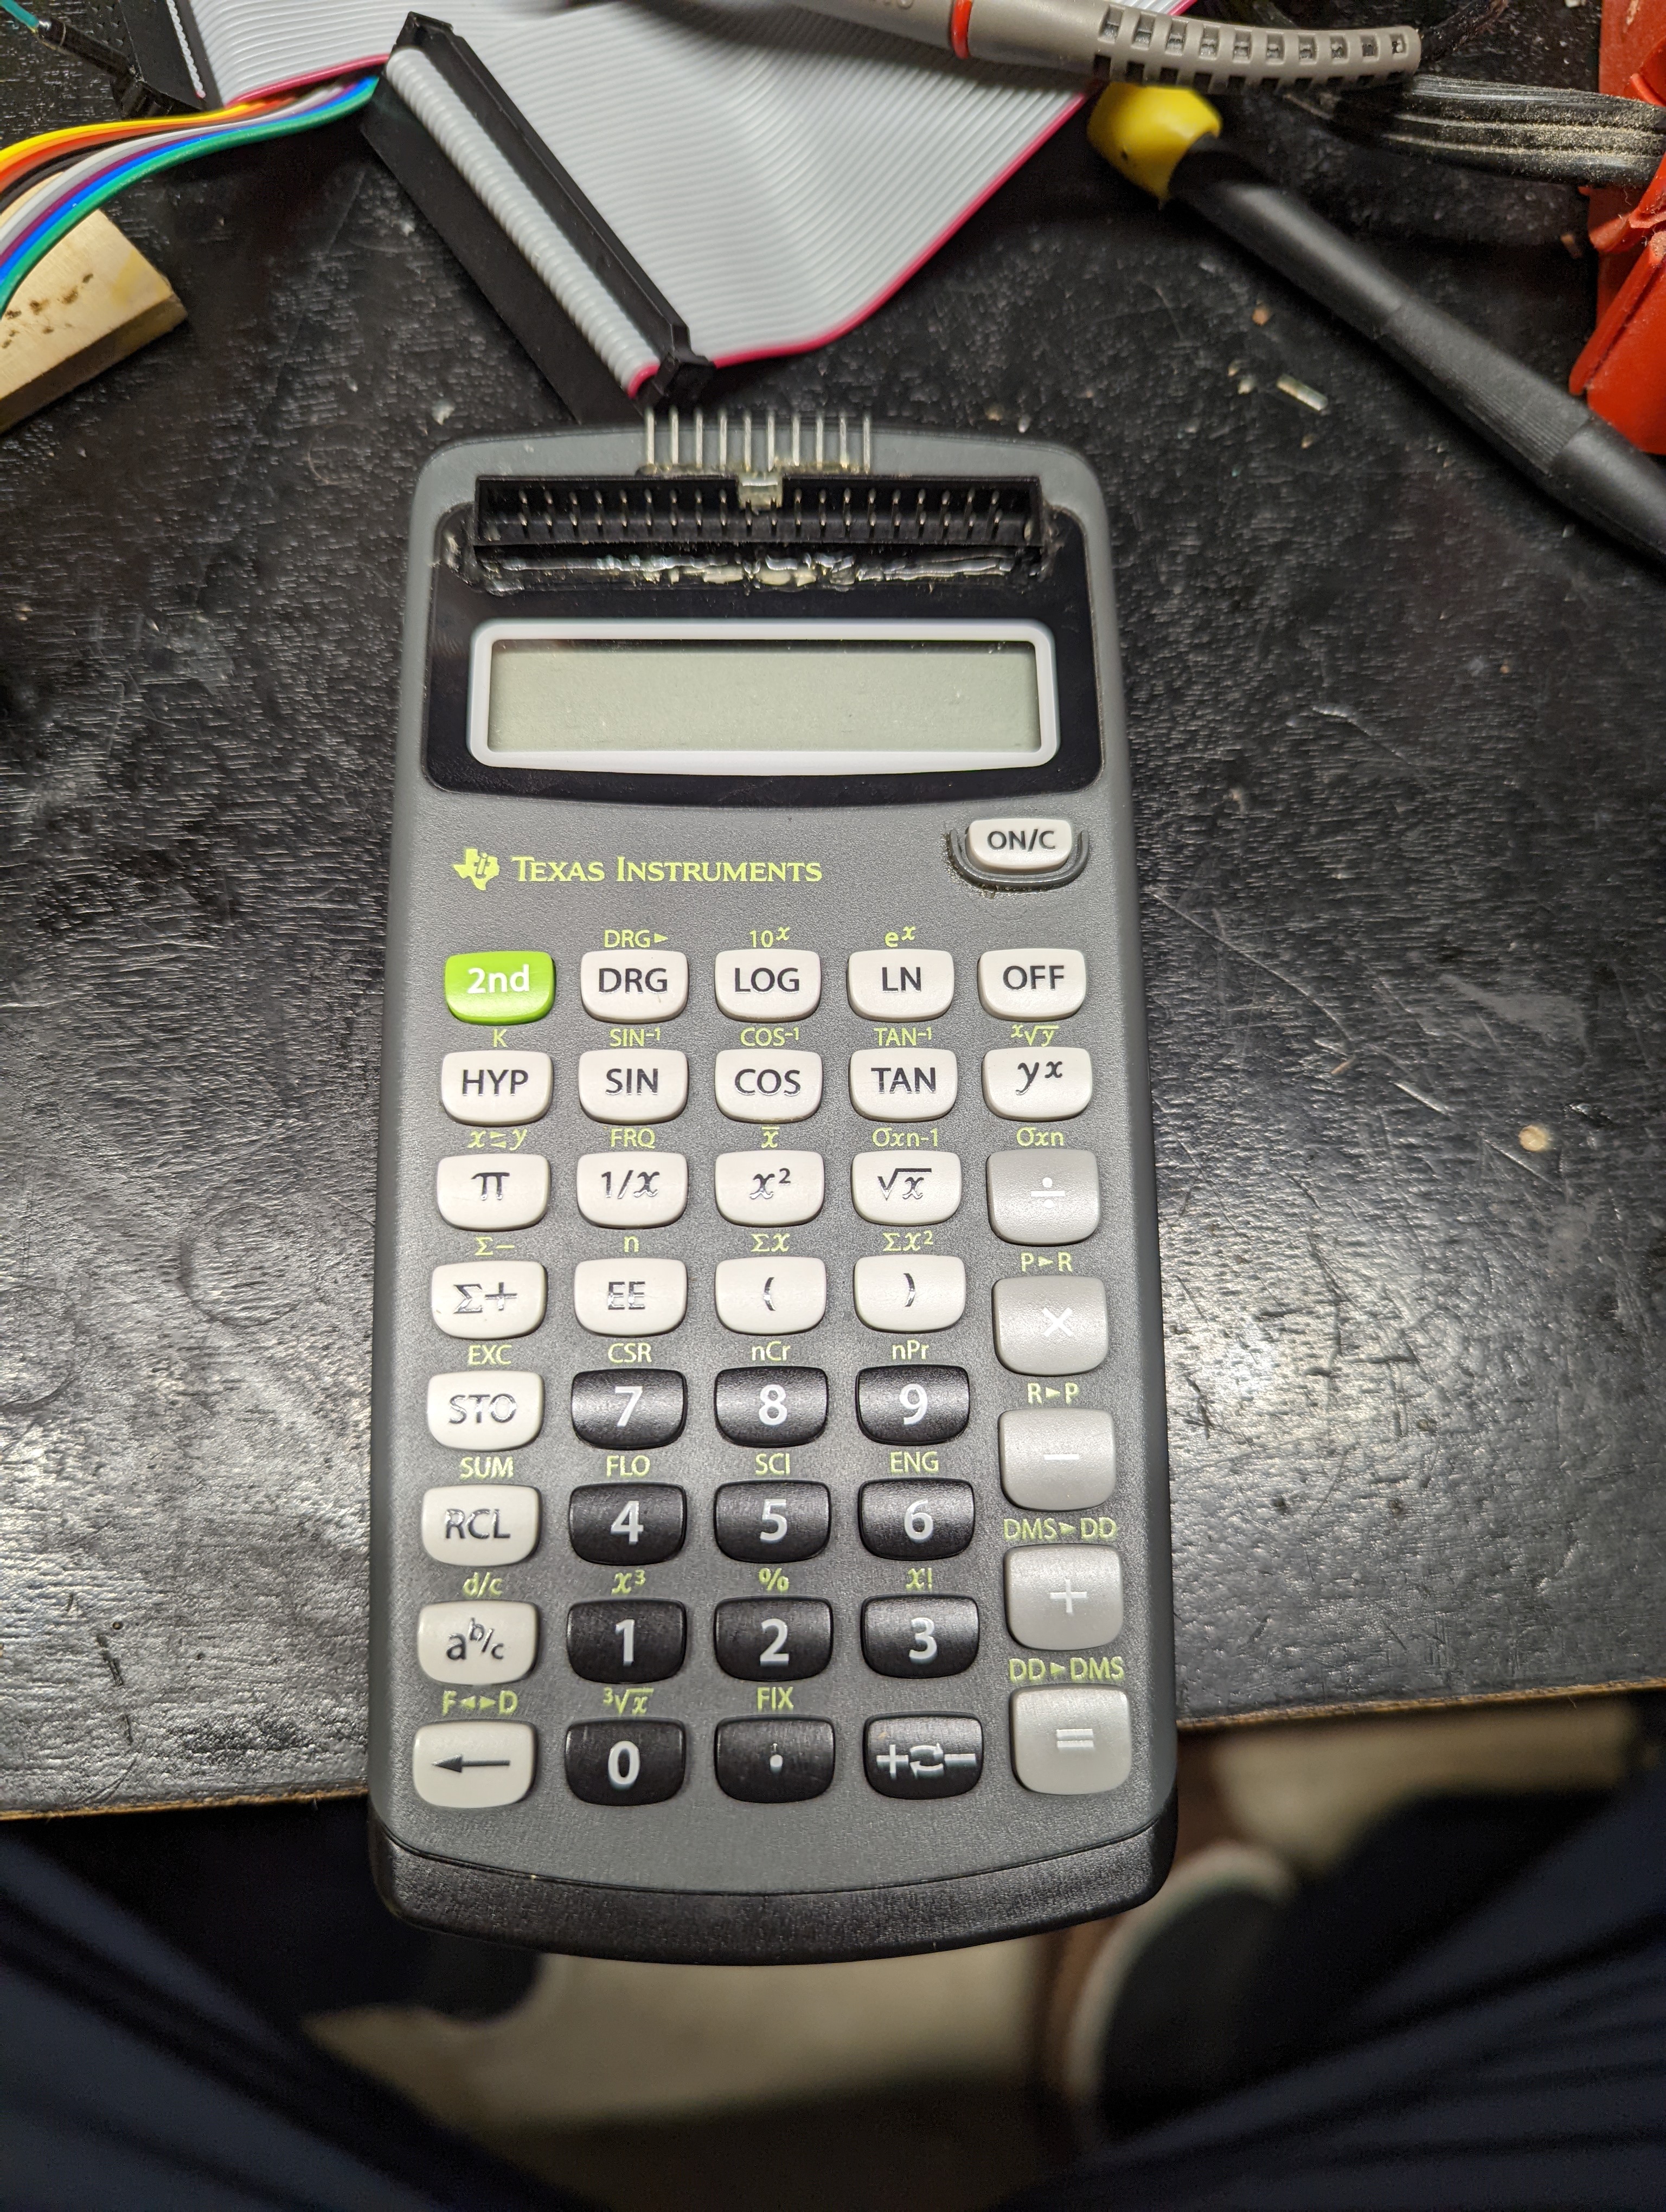 a picture of the outside of the calculator after it was modified